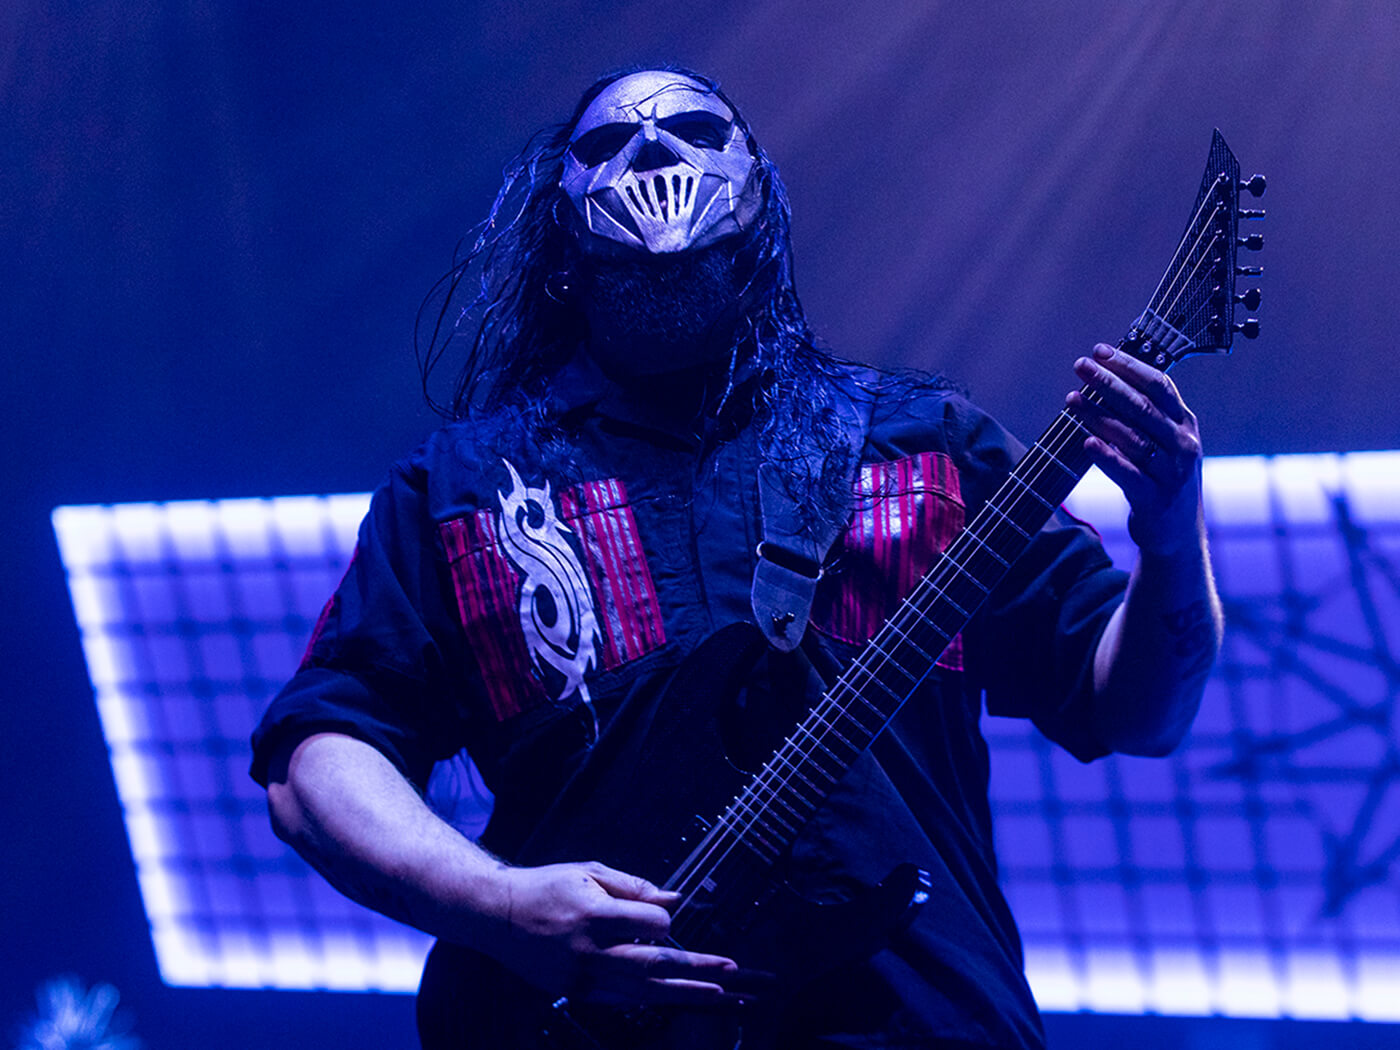 Mick Thomson of Slipknot performing with a Jackson guitar in 2020, photo by Michael Campanella/Redferns via Getty Images